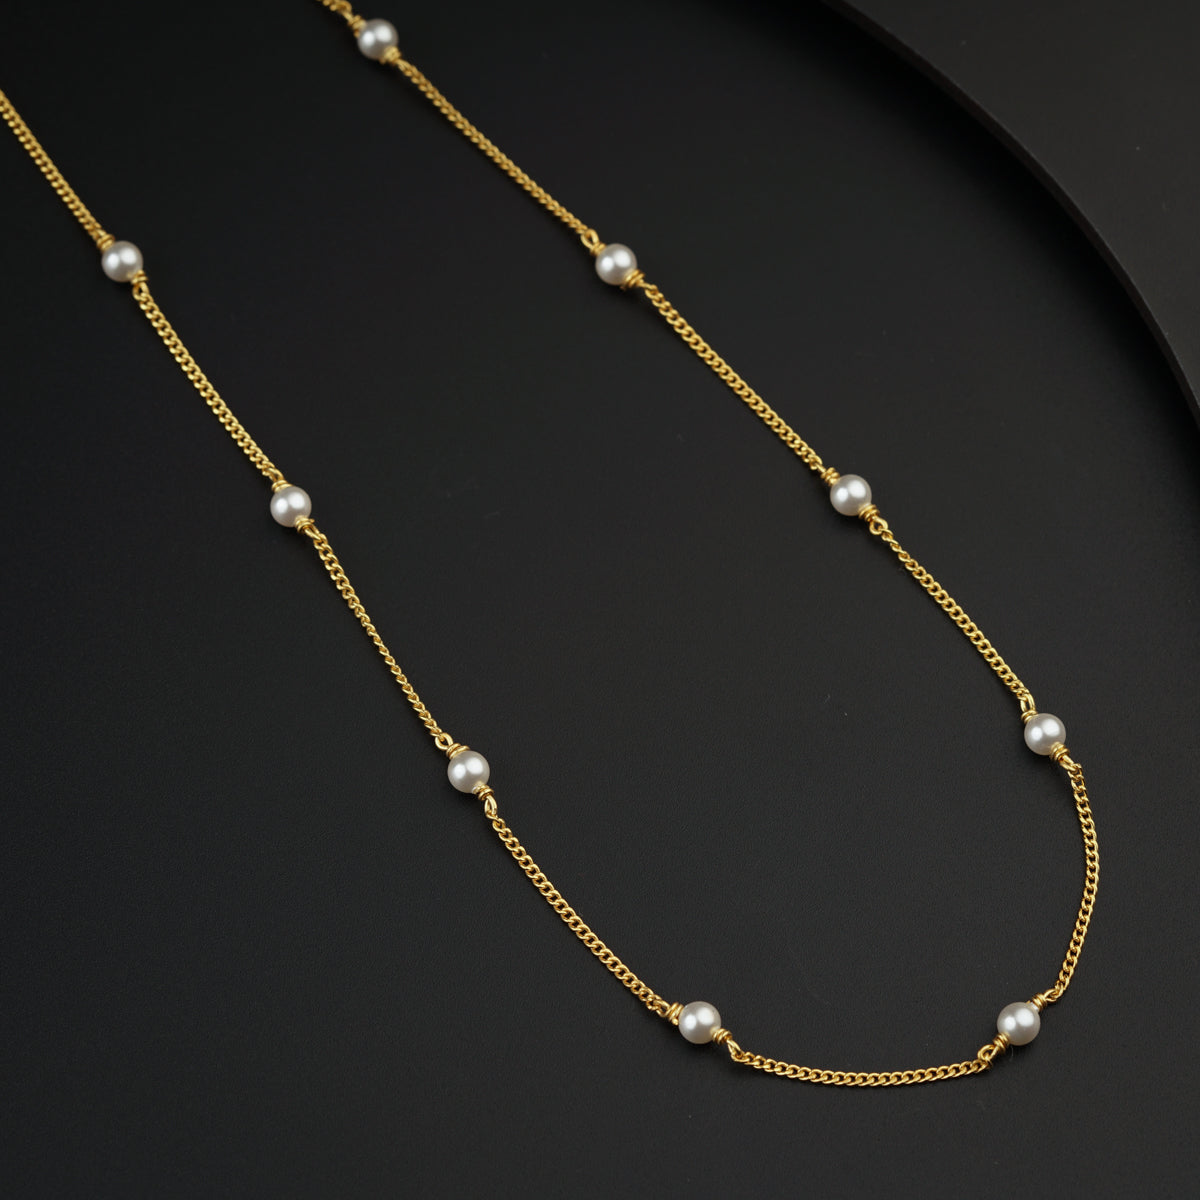 a gold necklace with pearls on a black surface